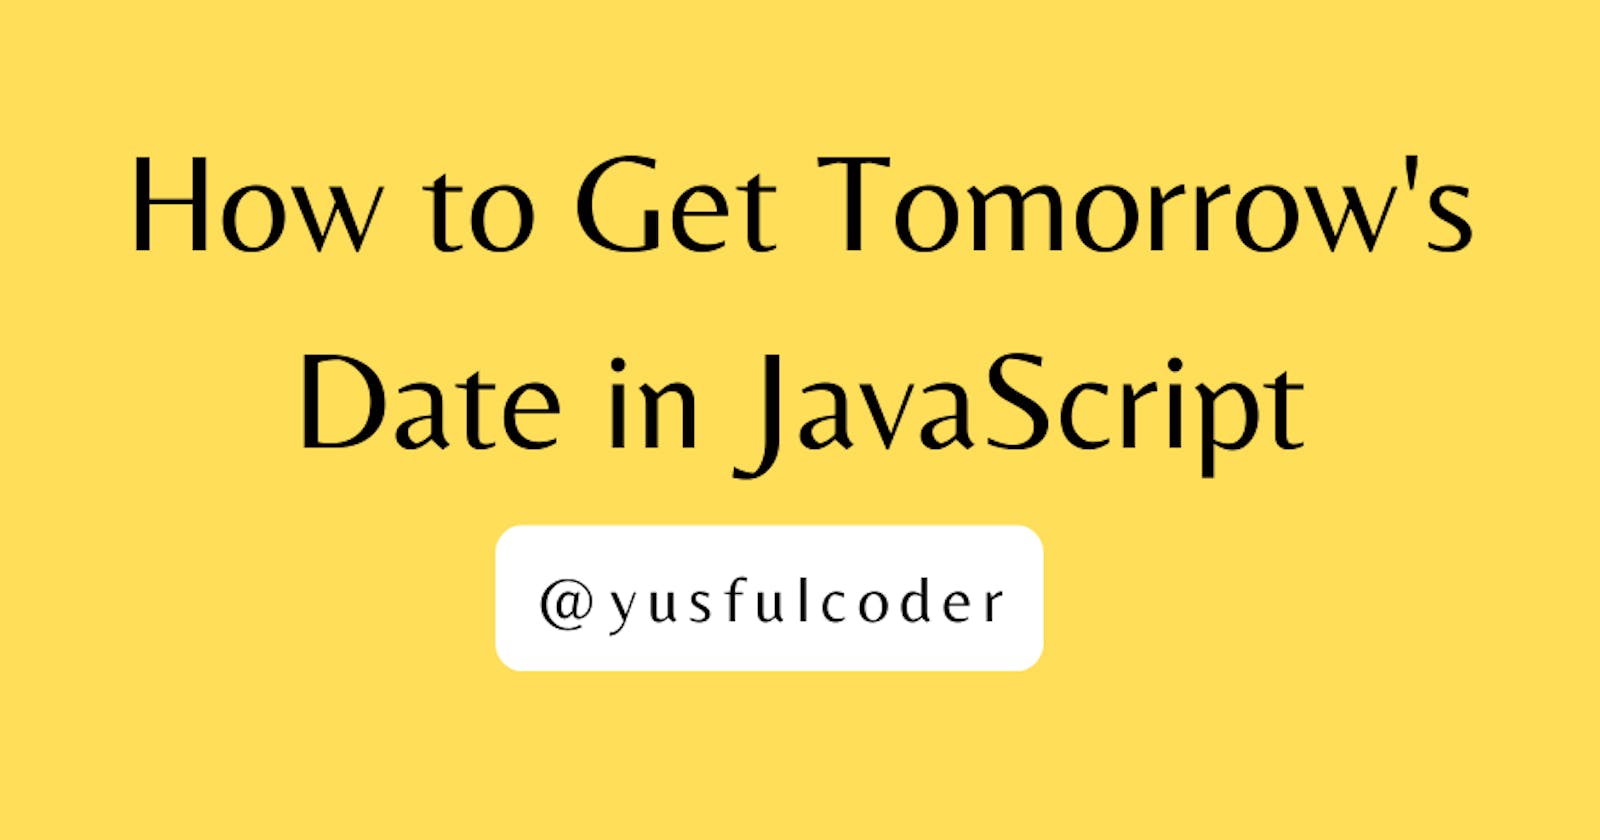 How to Get Tomorrow’s Date in JavaScript